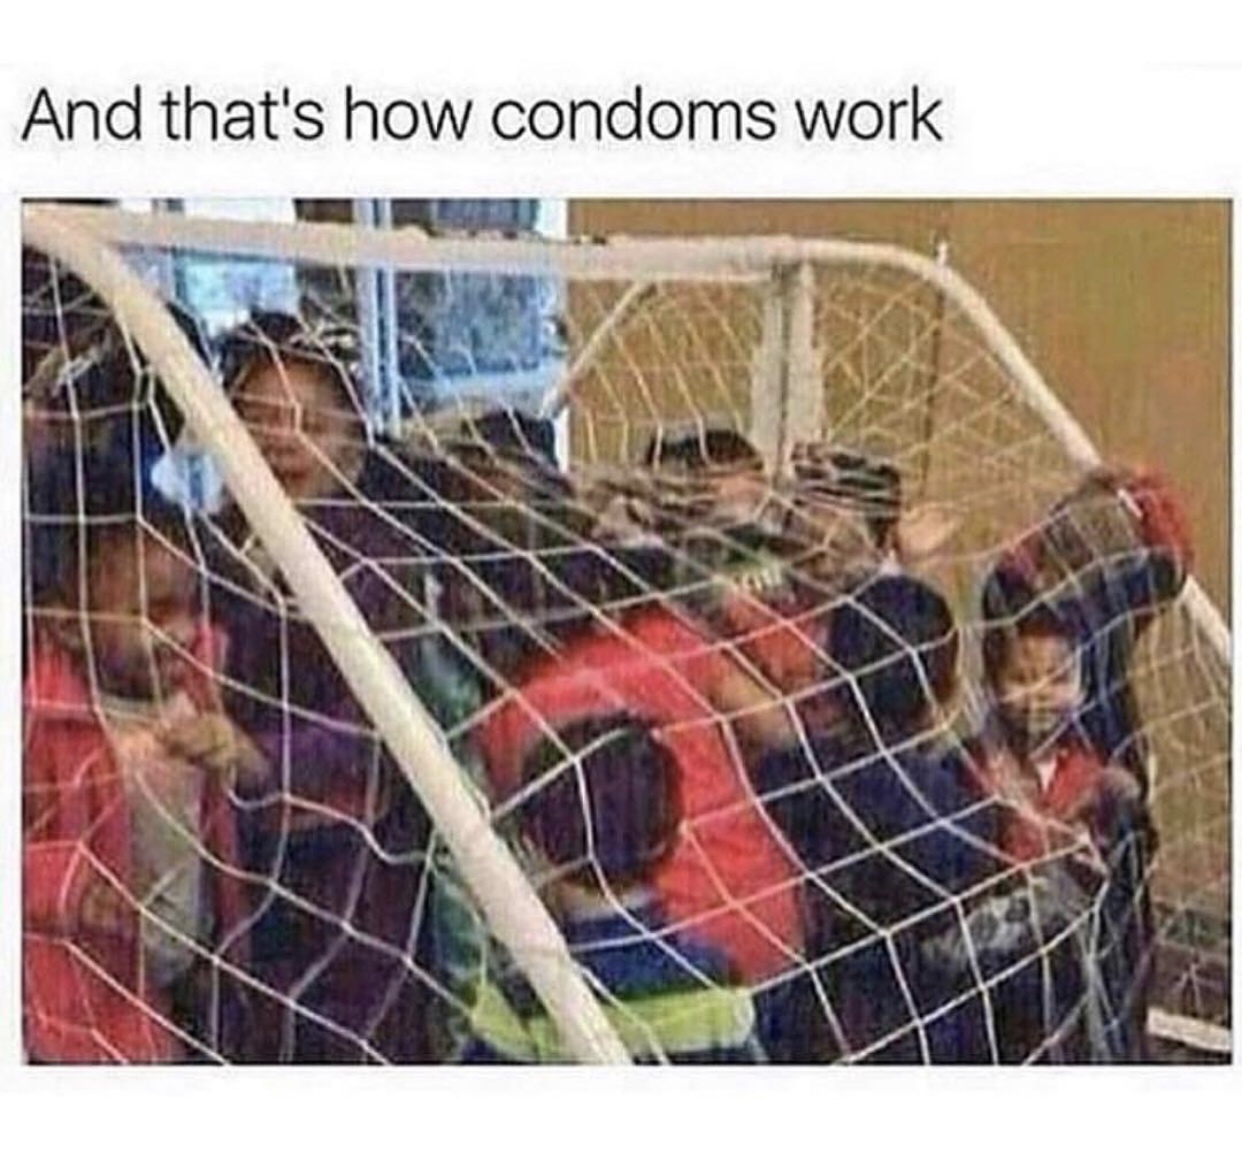 thats how condoms work - And that's how condoms work